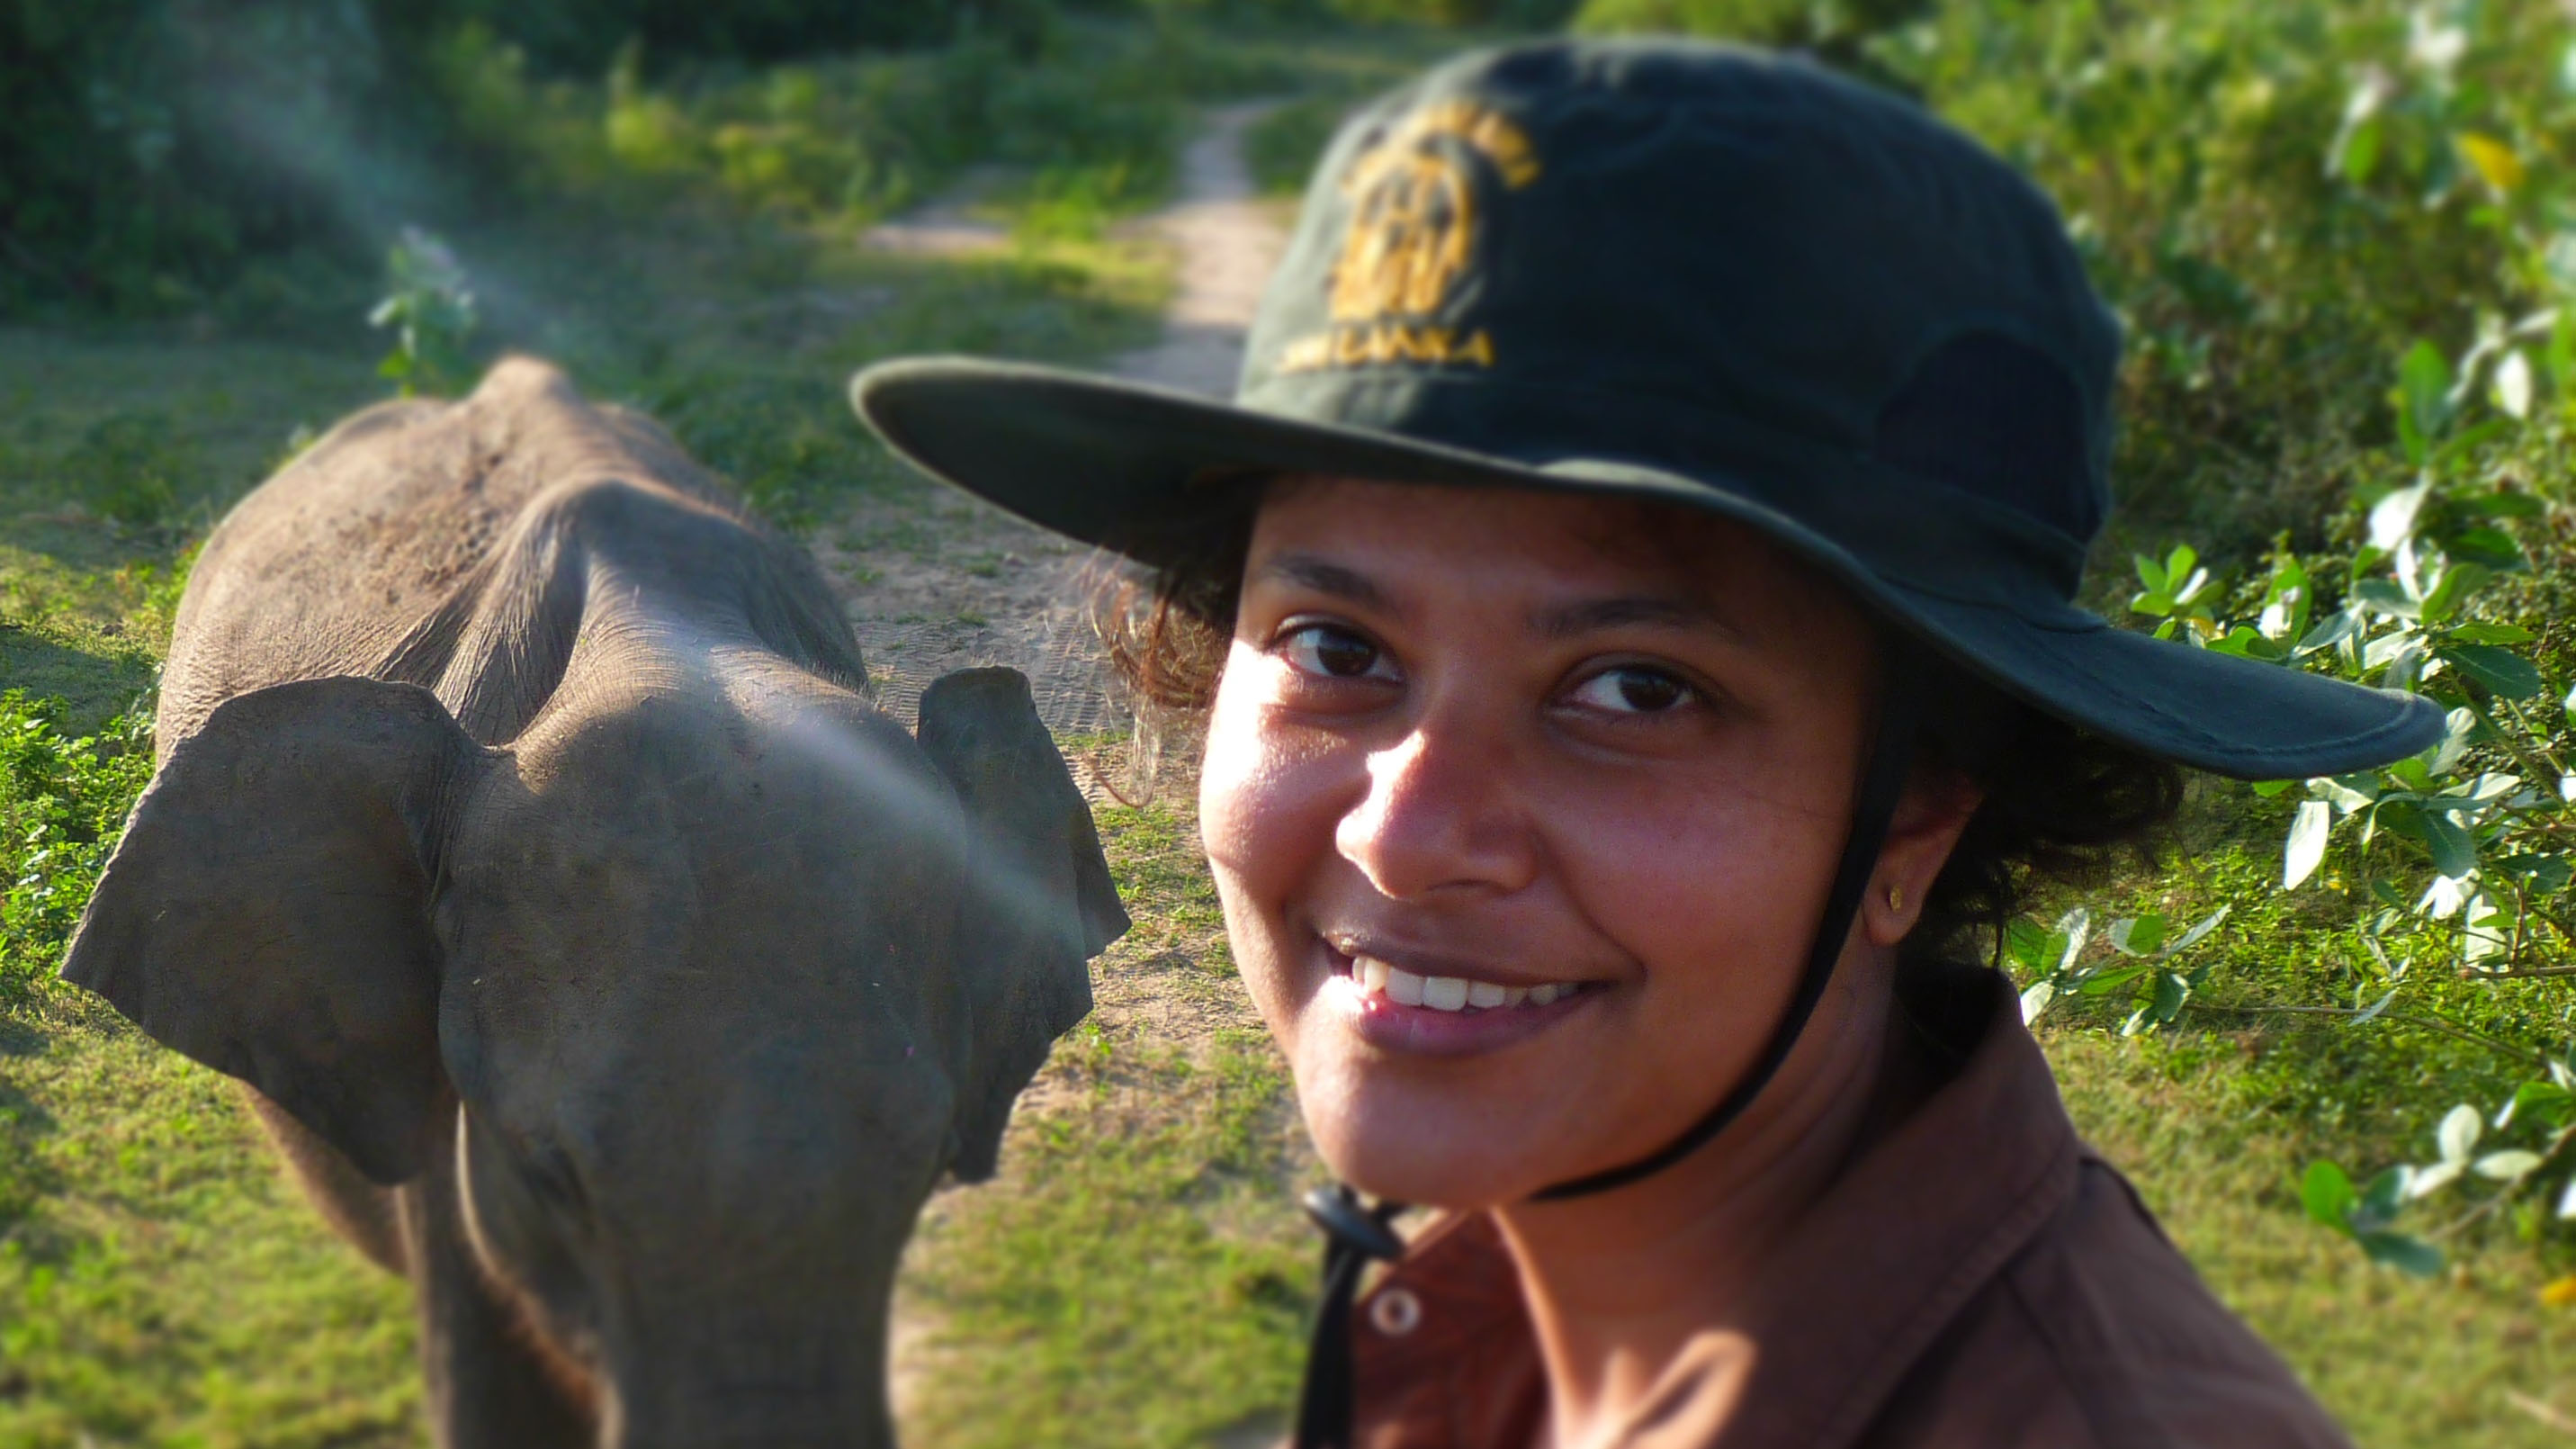 Shermin smiles at the camera, wearing a wide brimmed hat. She is sitting on top of a vehicle, and behind her an Asian elephant is visible.